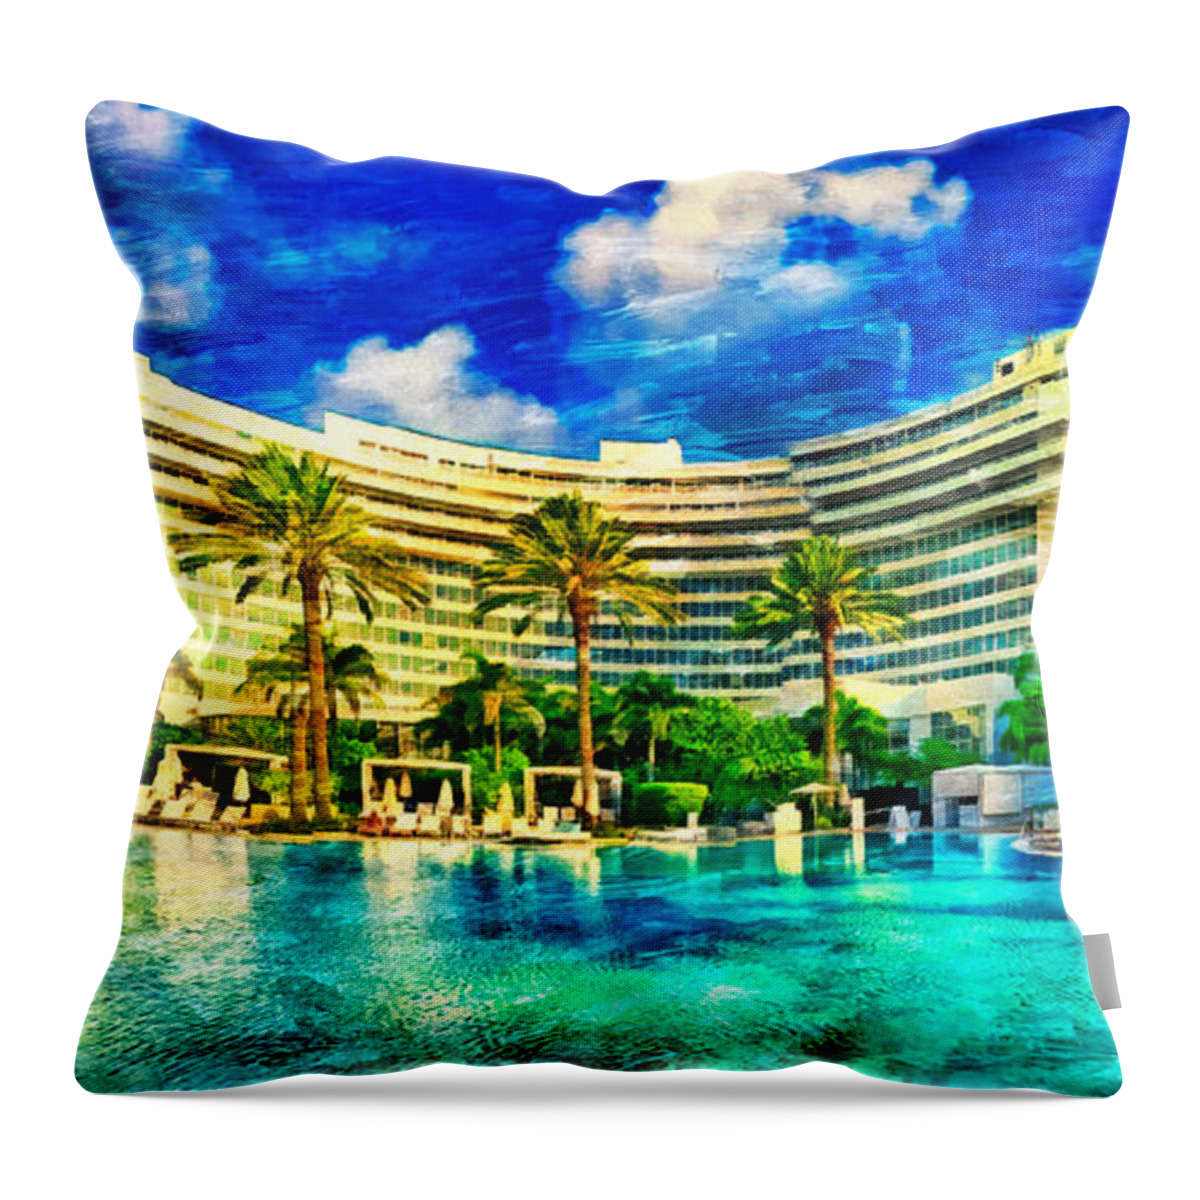 Fontainebleau Miami Beach Throw Pillow featuring the digital art Fontainebleau Miami Beach seen from the swimming pool - oil painting by Nicko Prints